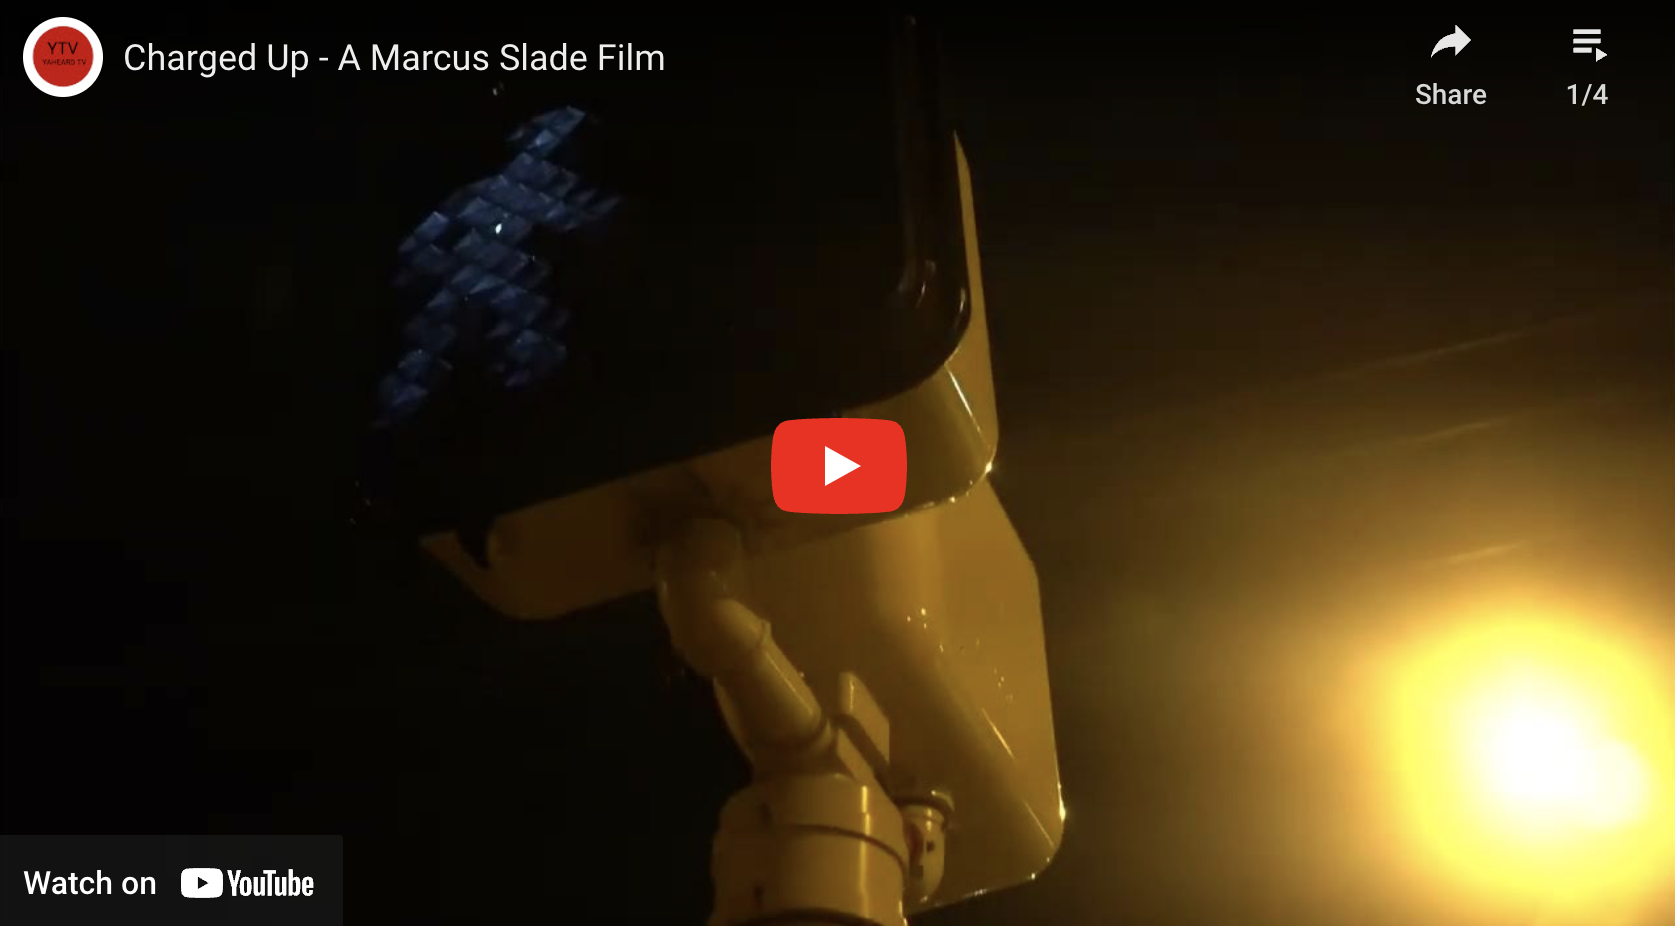 “Charged Up” – A Powerful Short Film from Director Marcus Slade